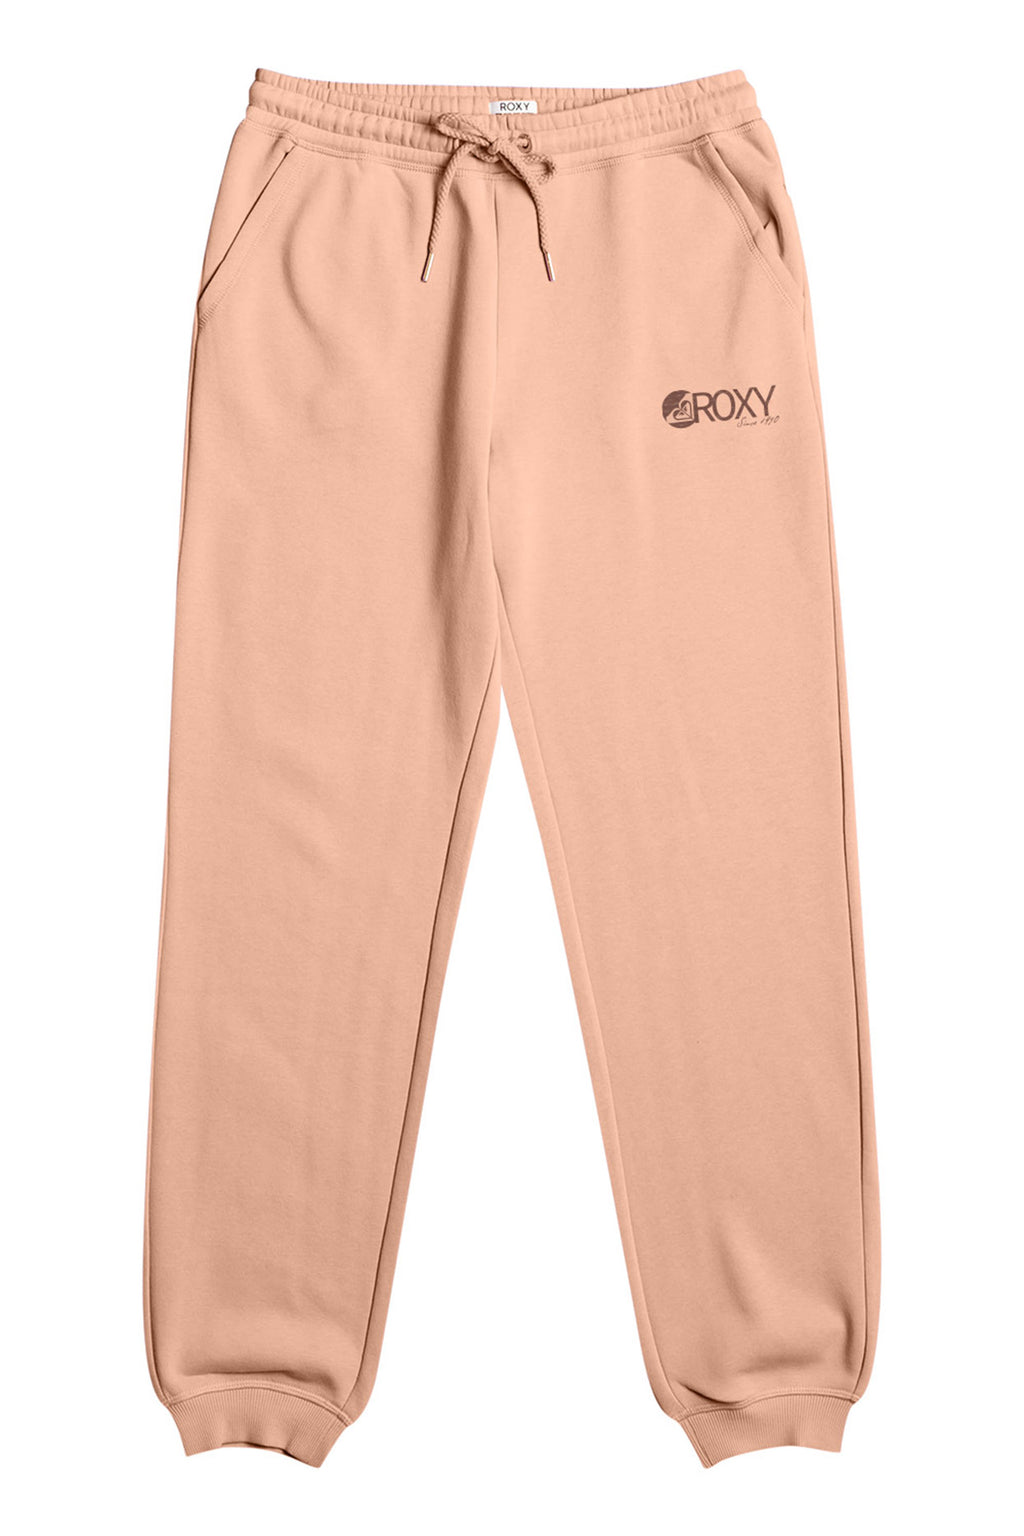 Roxy - Surf Stoked Pant